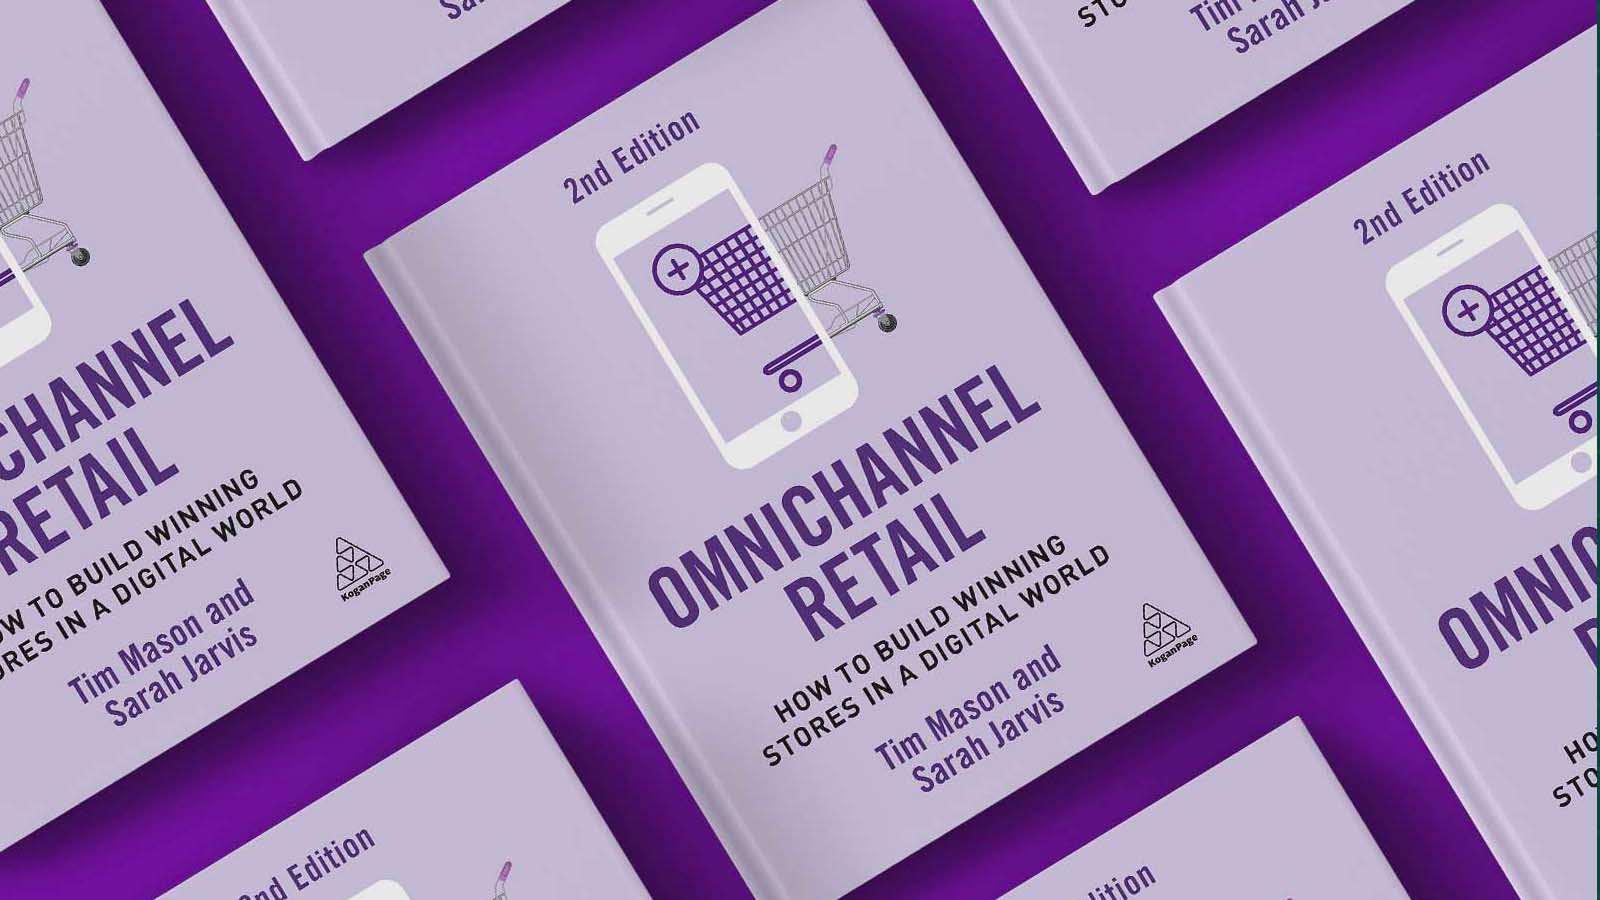 New Edition of Omnichannel Retail: How to Build Winning Stores in a Digital World Released